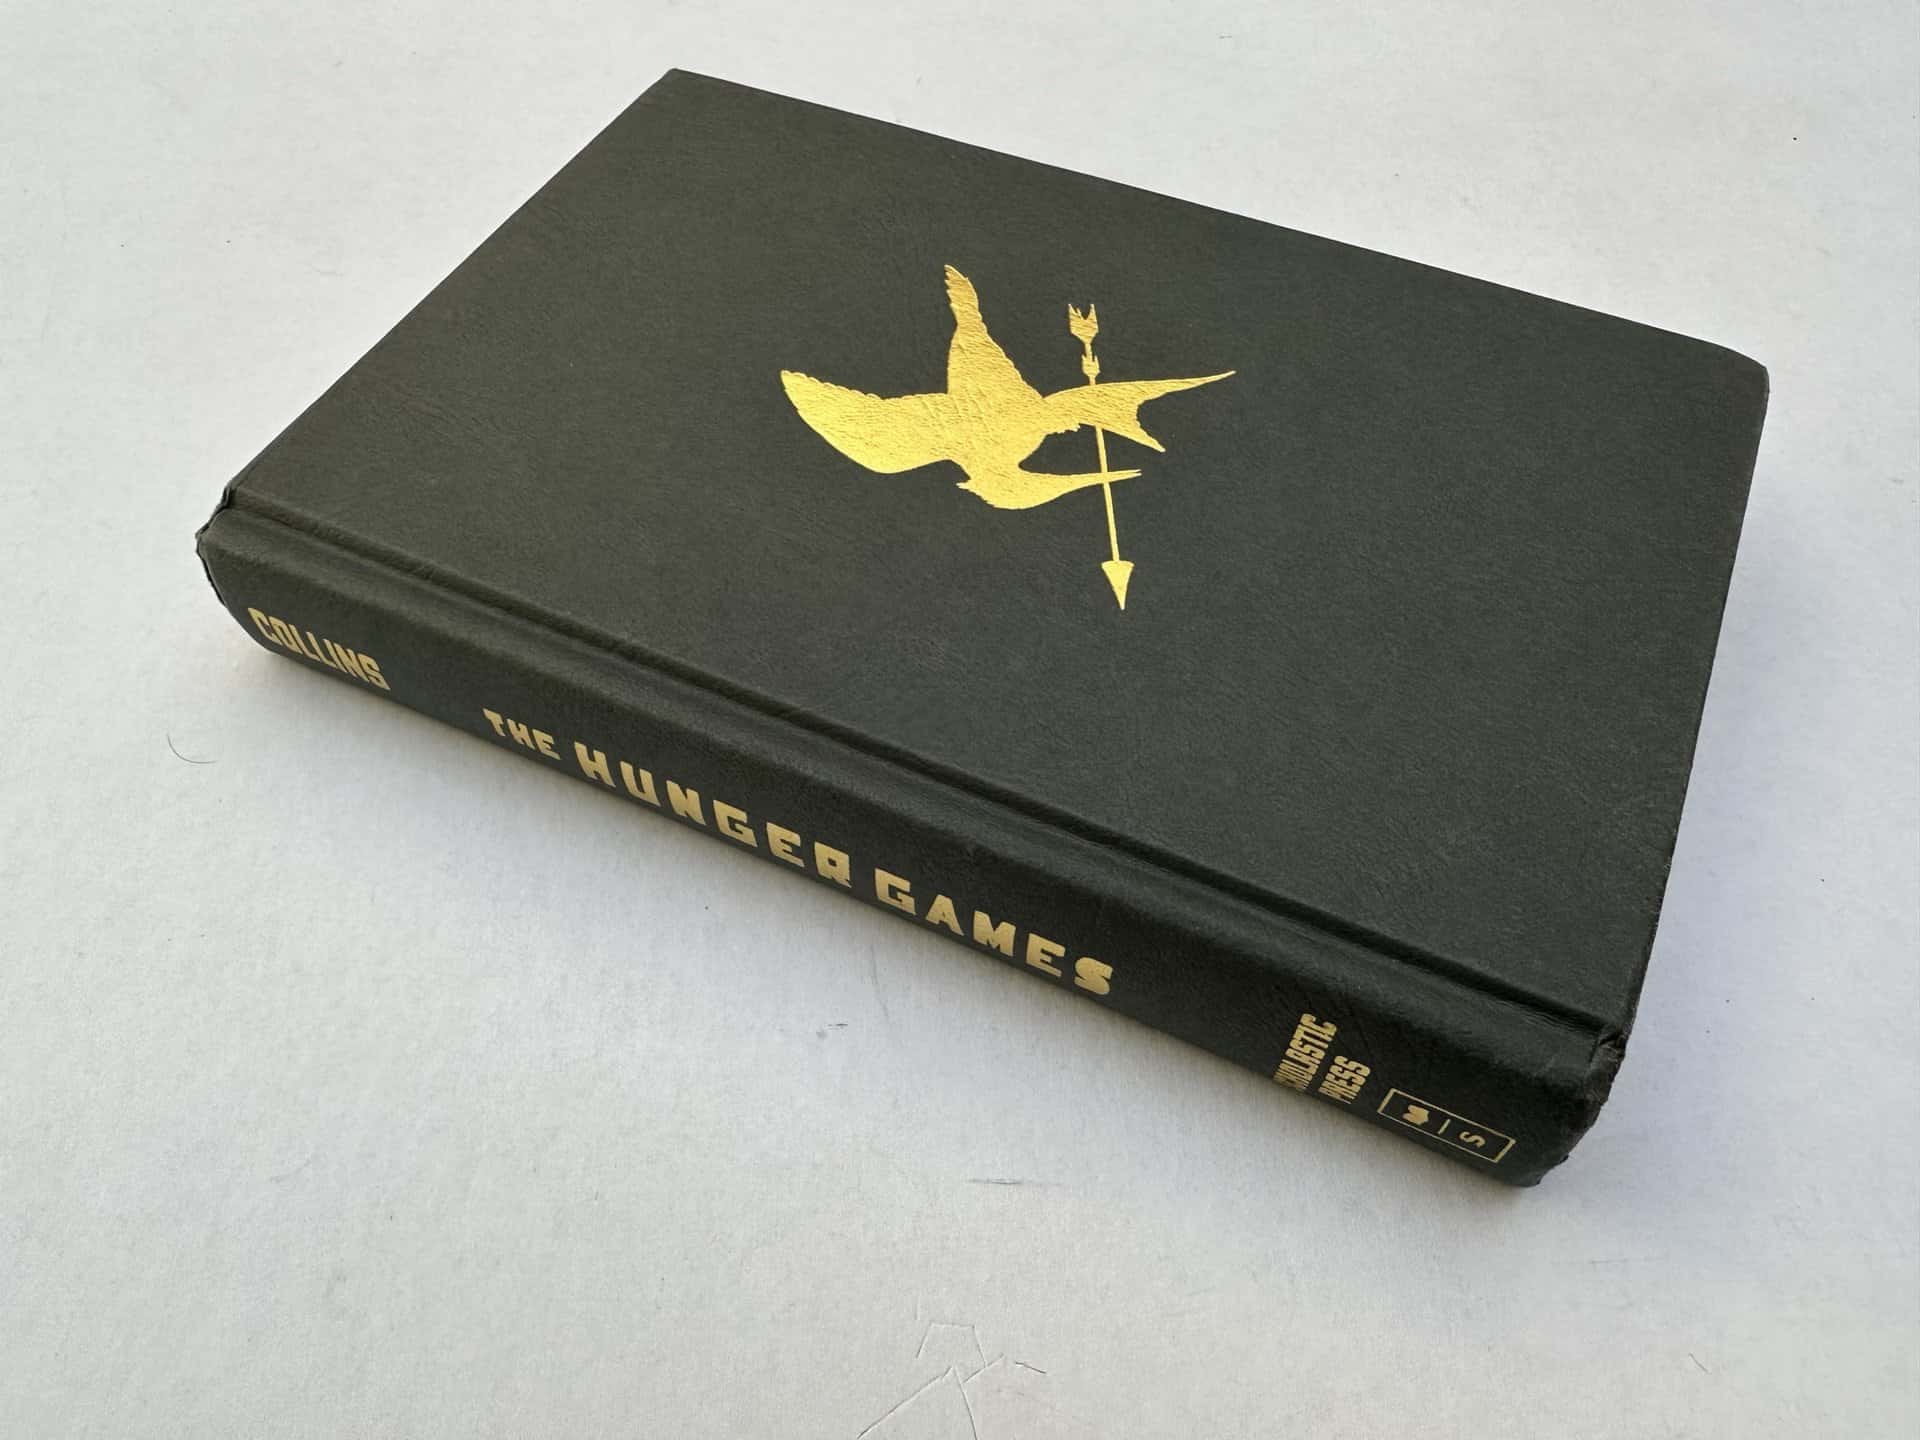 suzanne collins the hunger games first edition3